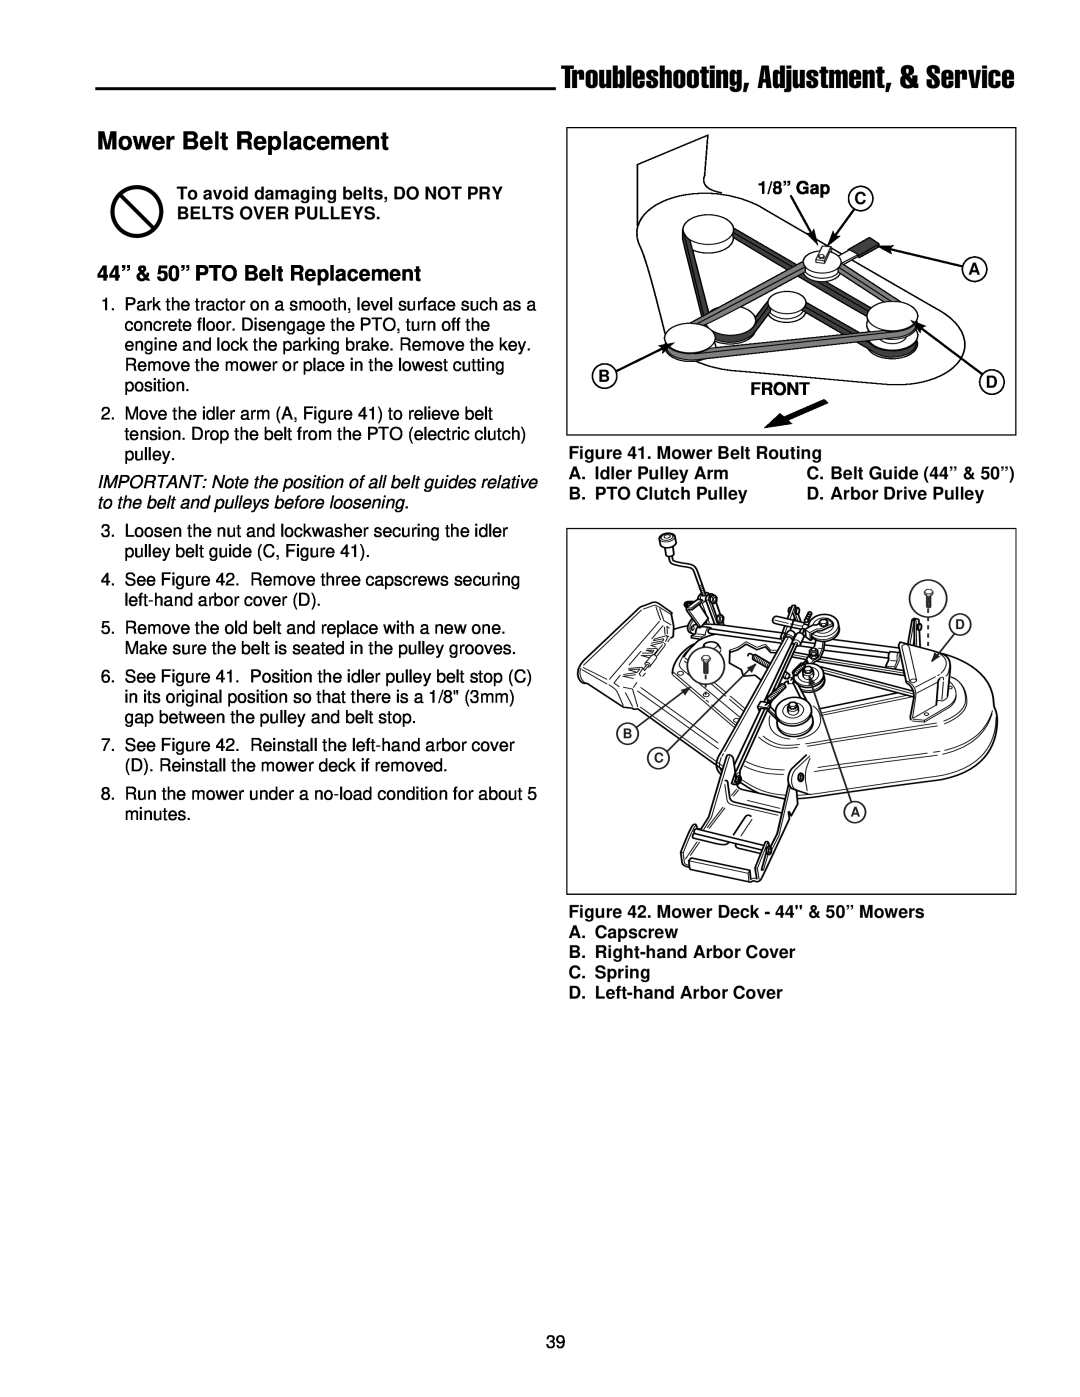 Simplicity 300 Series manual Mower Belt Replacement, Troubleshooting, Adjustment, & Service, 44” & 50” PTO Belt Replacement 